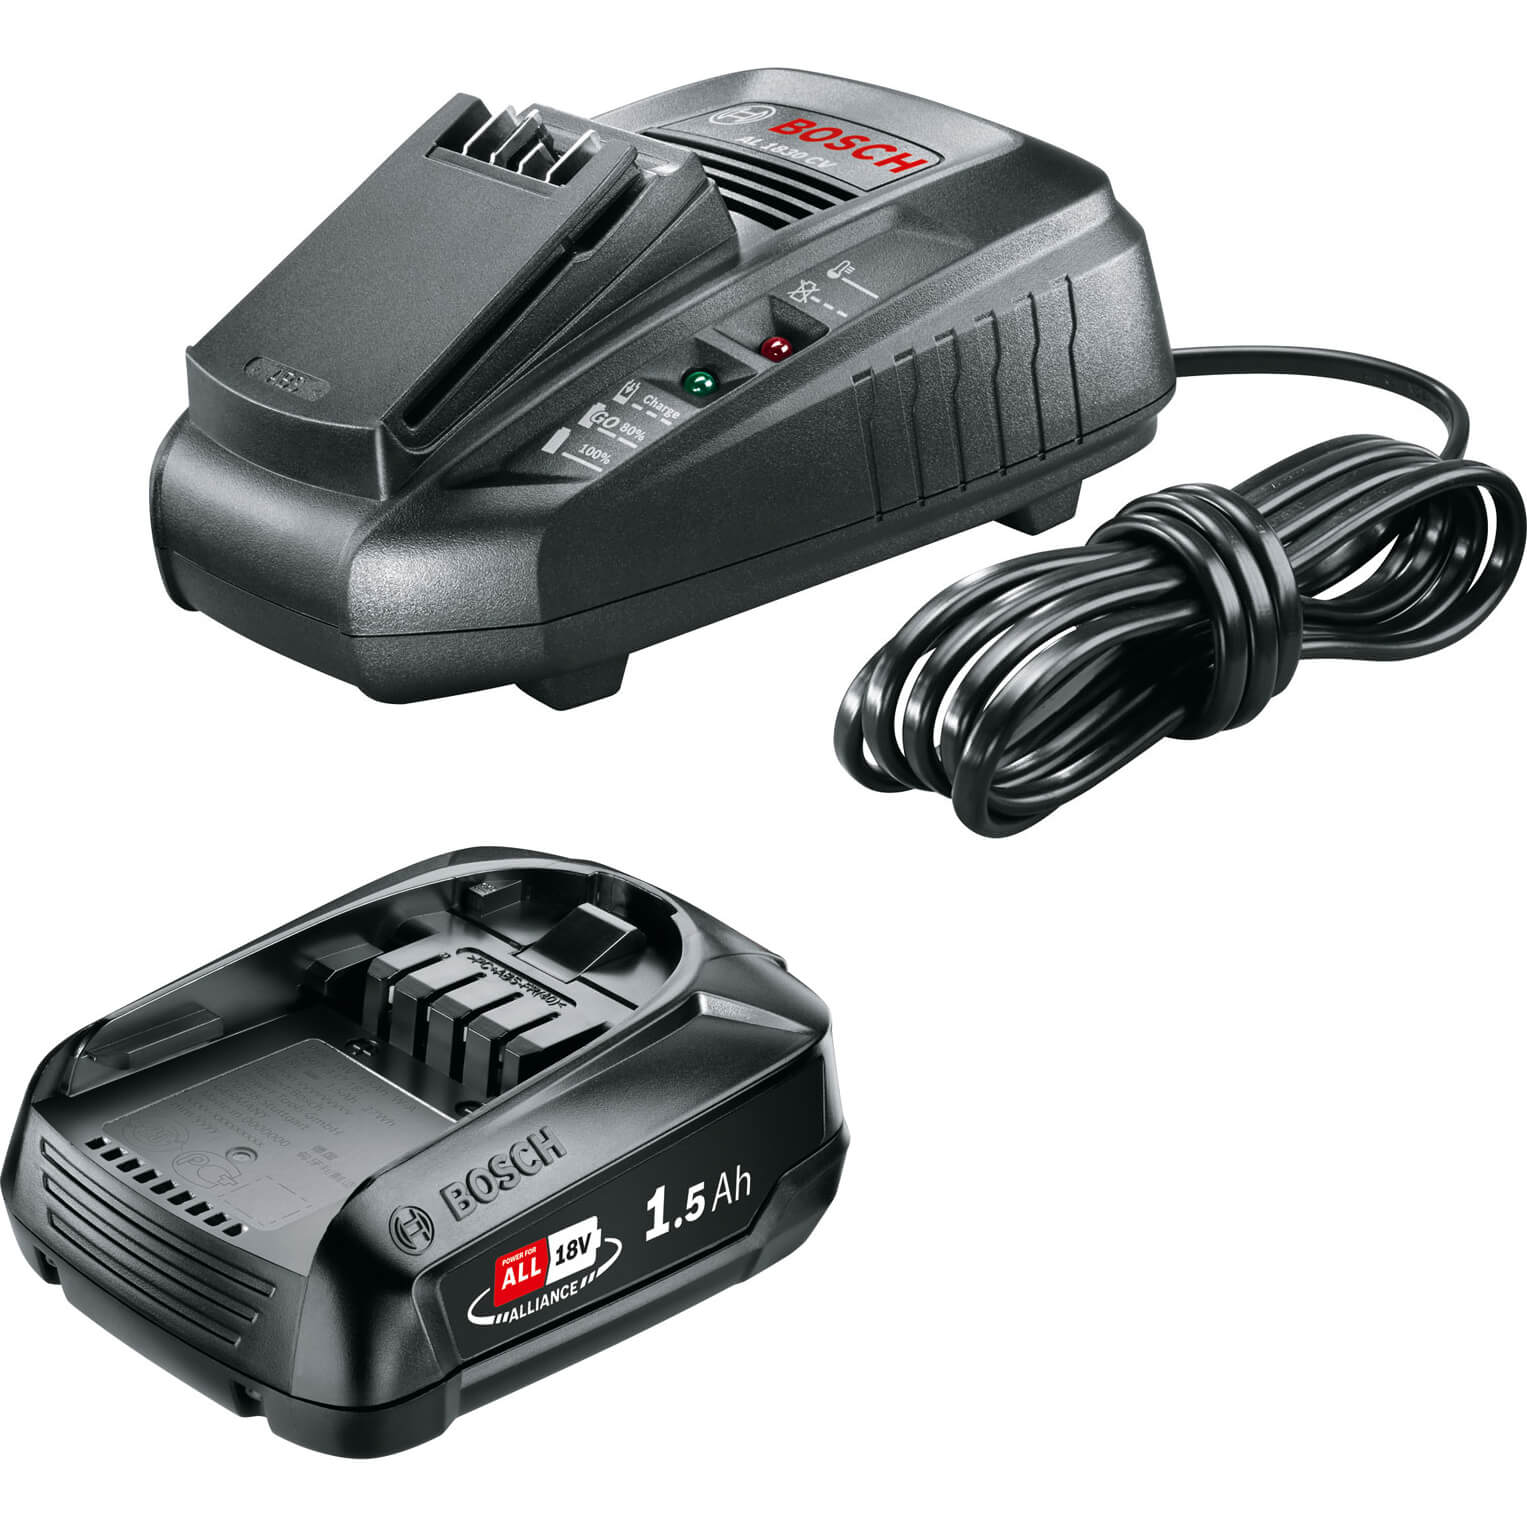 Image of Bosch Genuine GREEN 18v Cordless Li-ion Battery 1.5ah and 3A Fast Charger 1.5ah